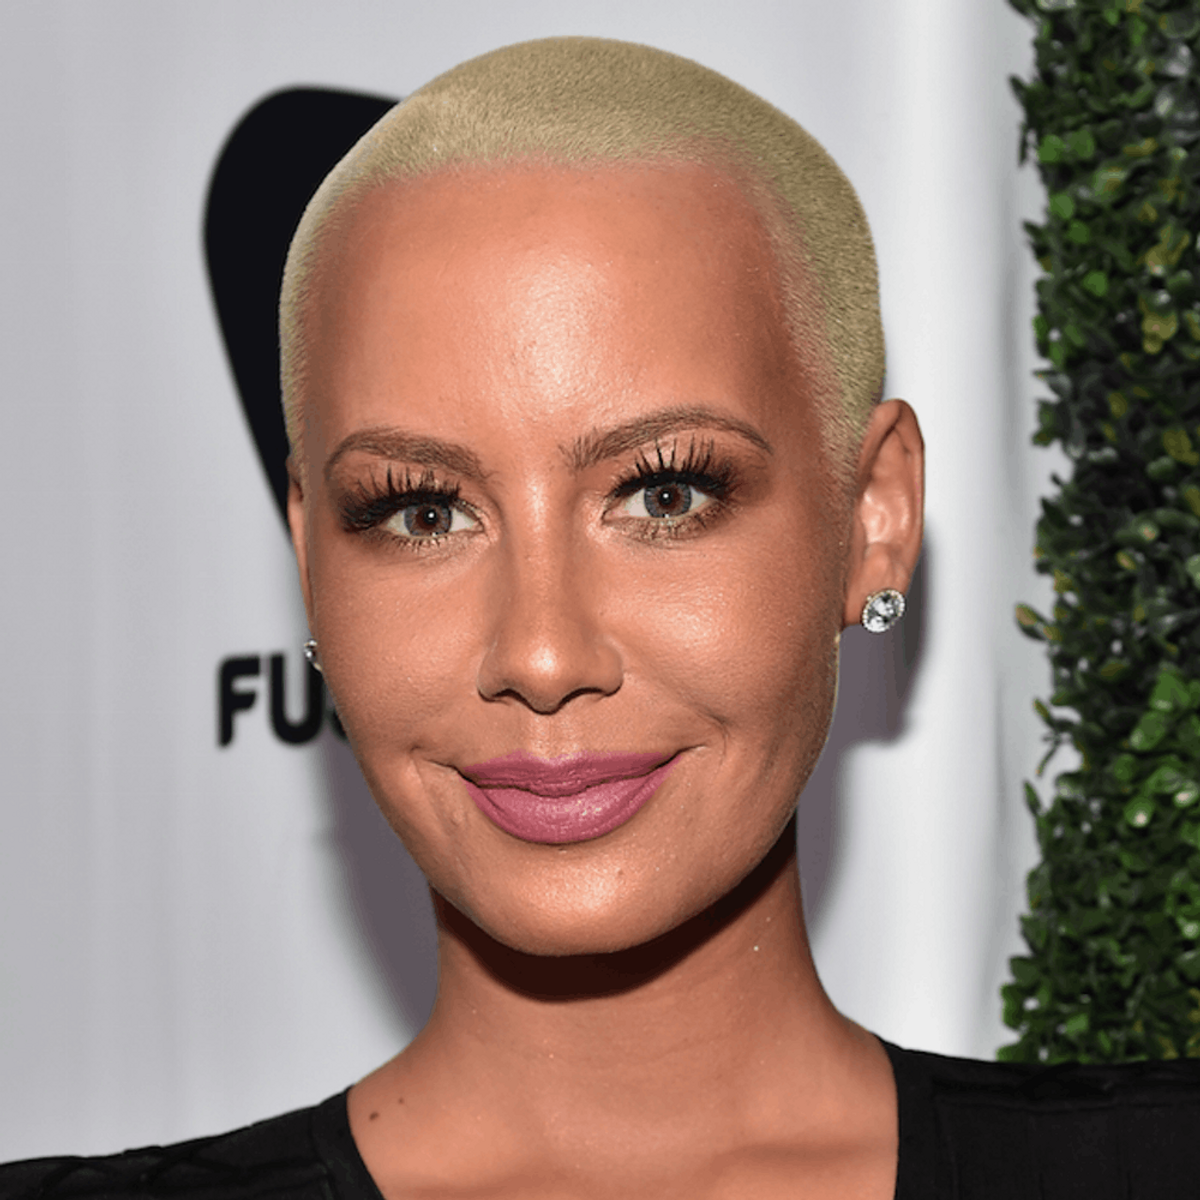 Amber Rose’s Letter to Her Son Will Break Your Heart